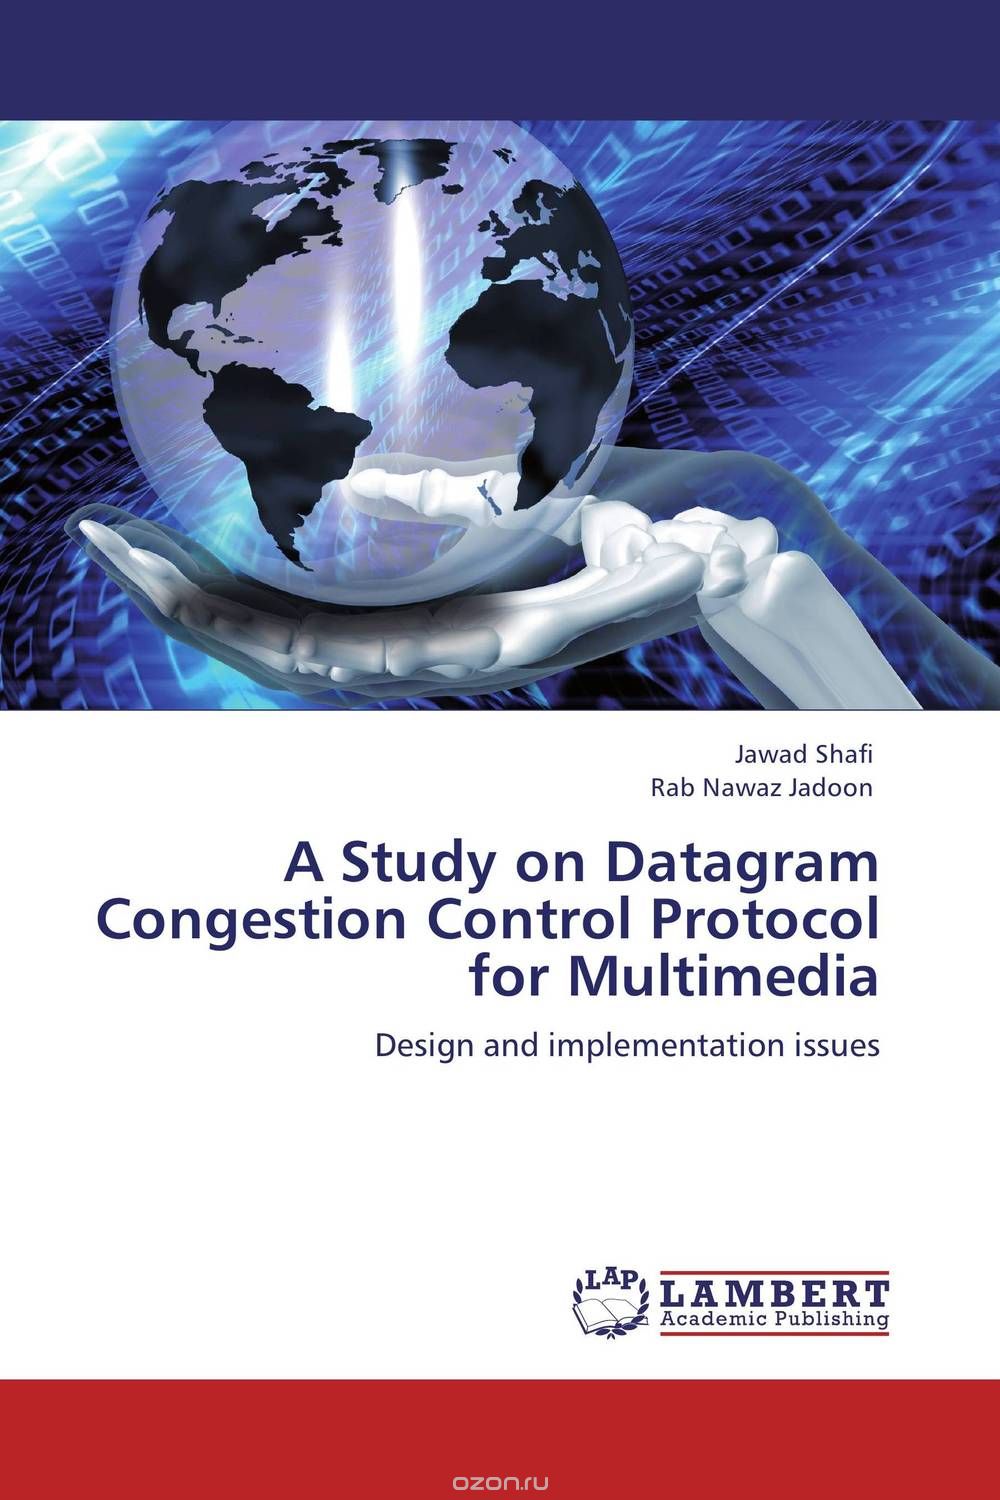 A Study on Datagram Congestion Control Protocol for Multimedia